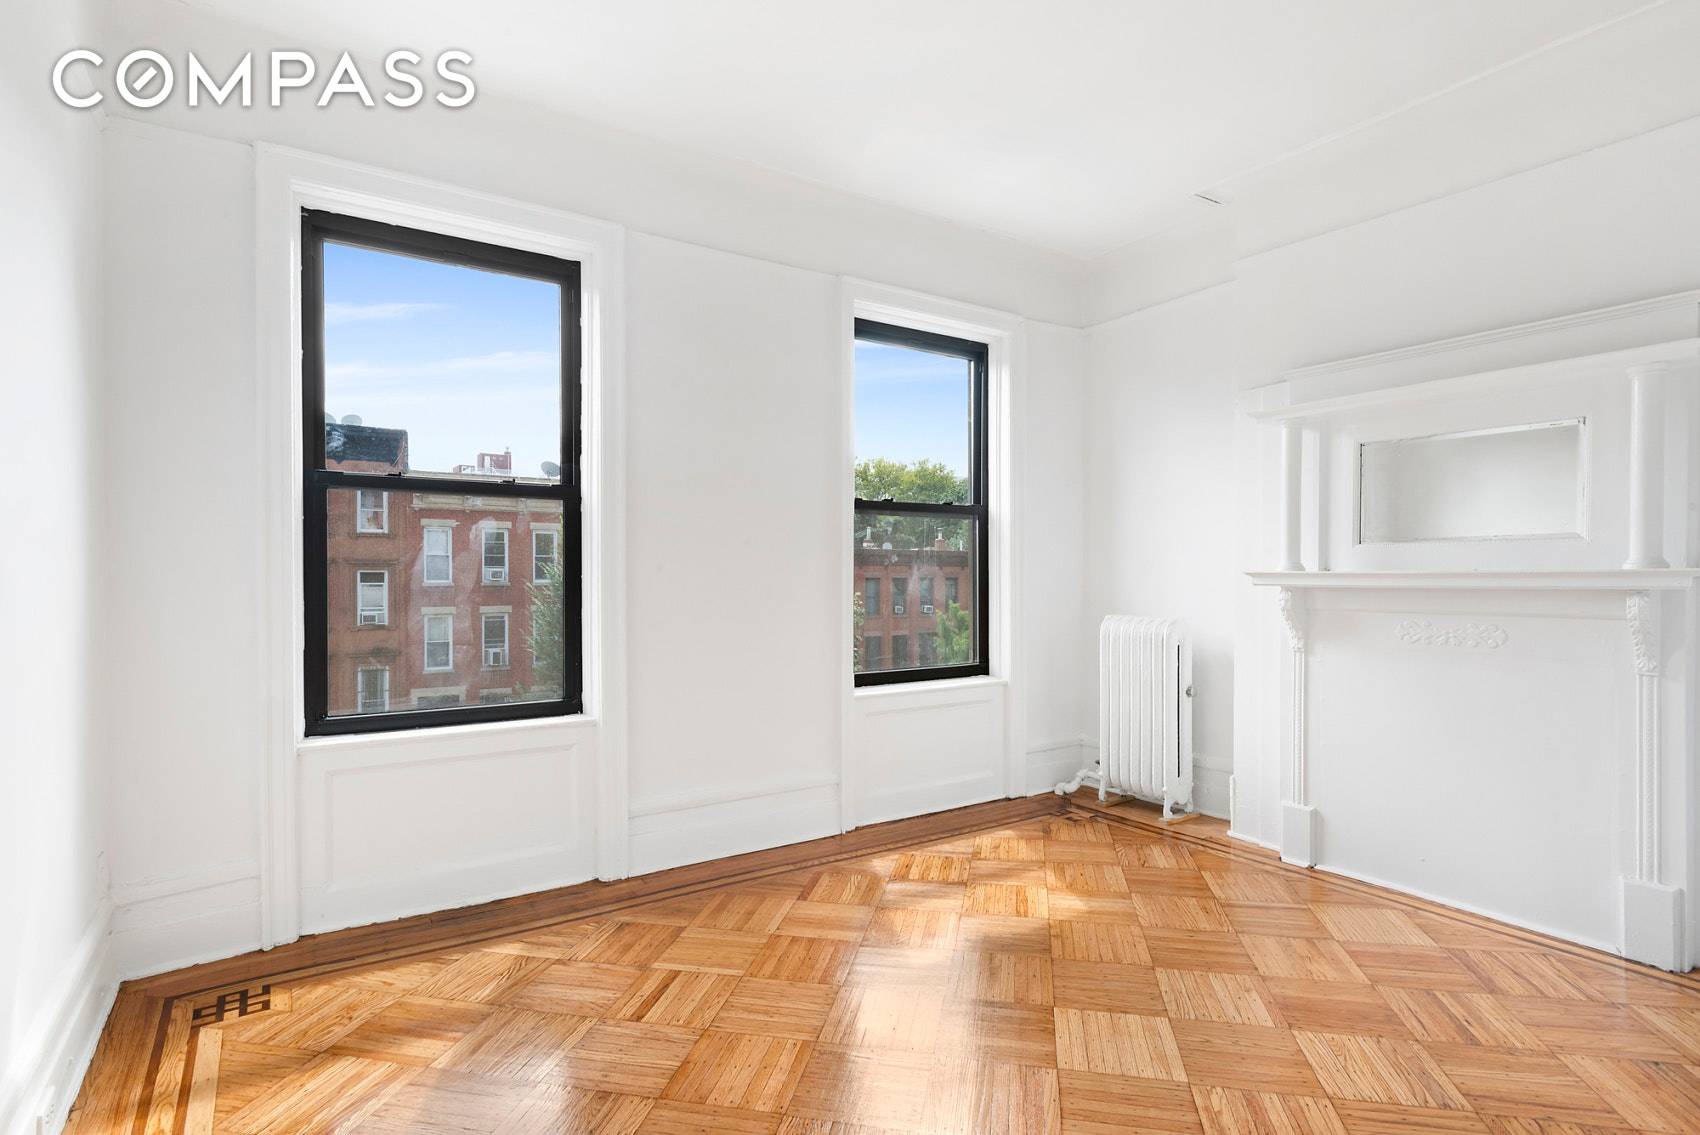 An incredible offer in this spacious 4 bedroom located in Prospect heights.